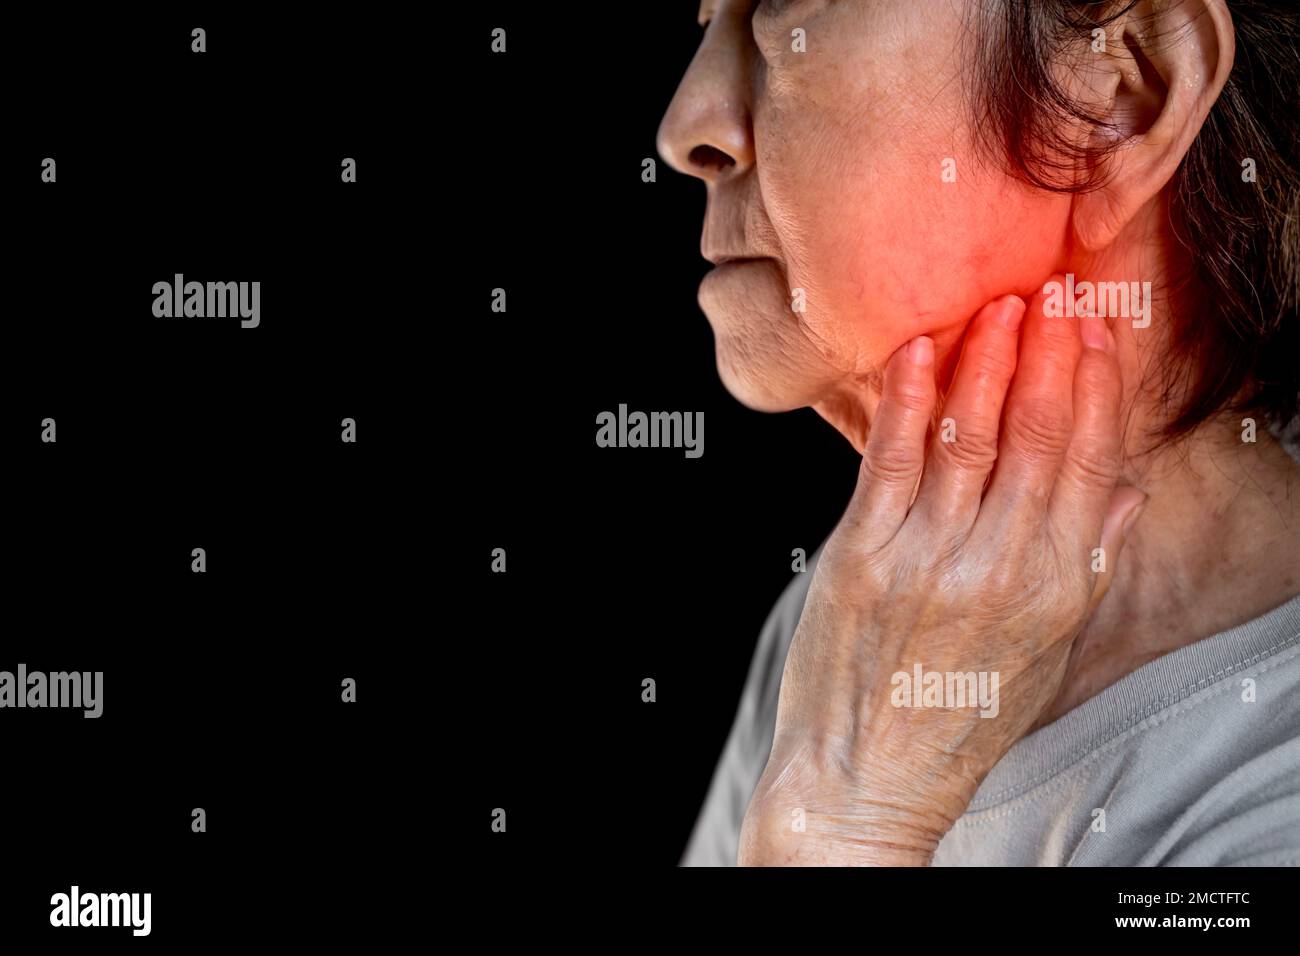 Inflammation at the jaw of Asian female patient. She feels wisdom toothache and lymph node pain. Stock Photo